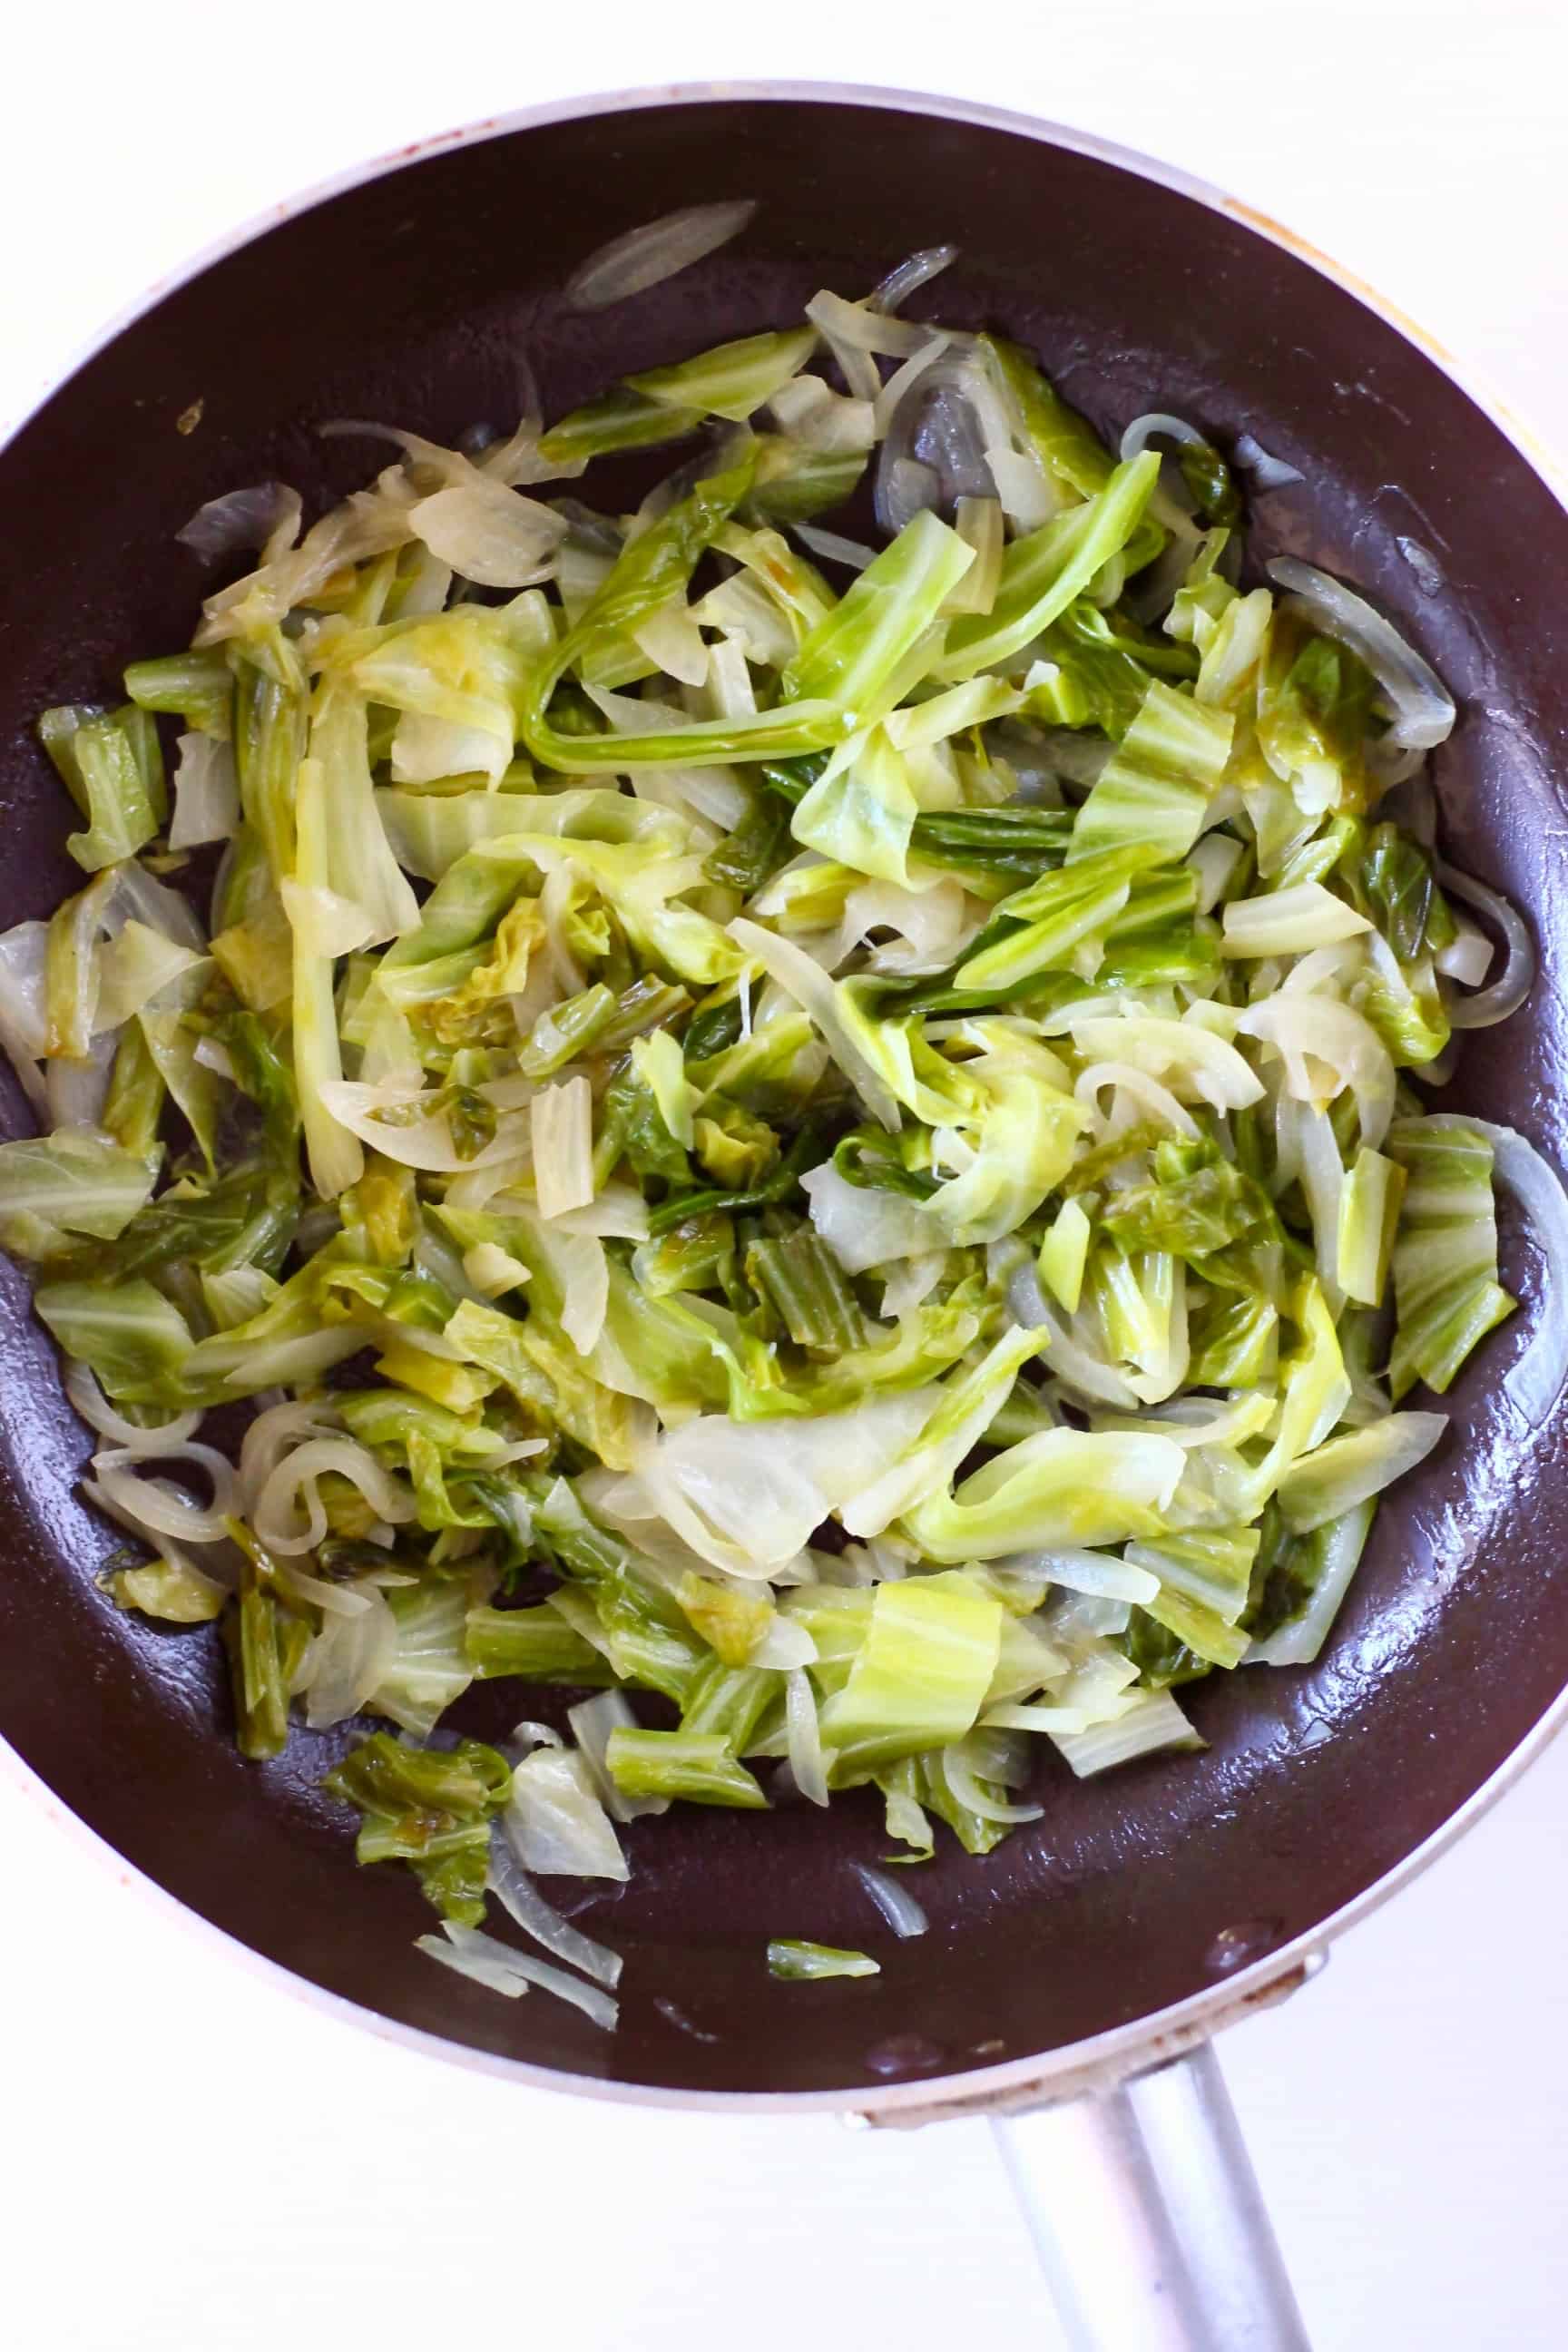 Sliced onions and cabbage being fried in a frying pan